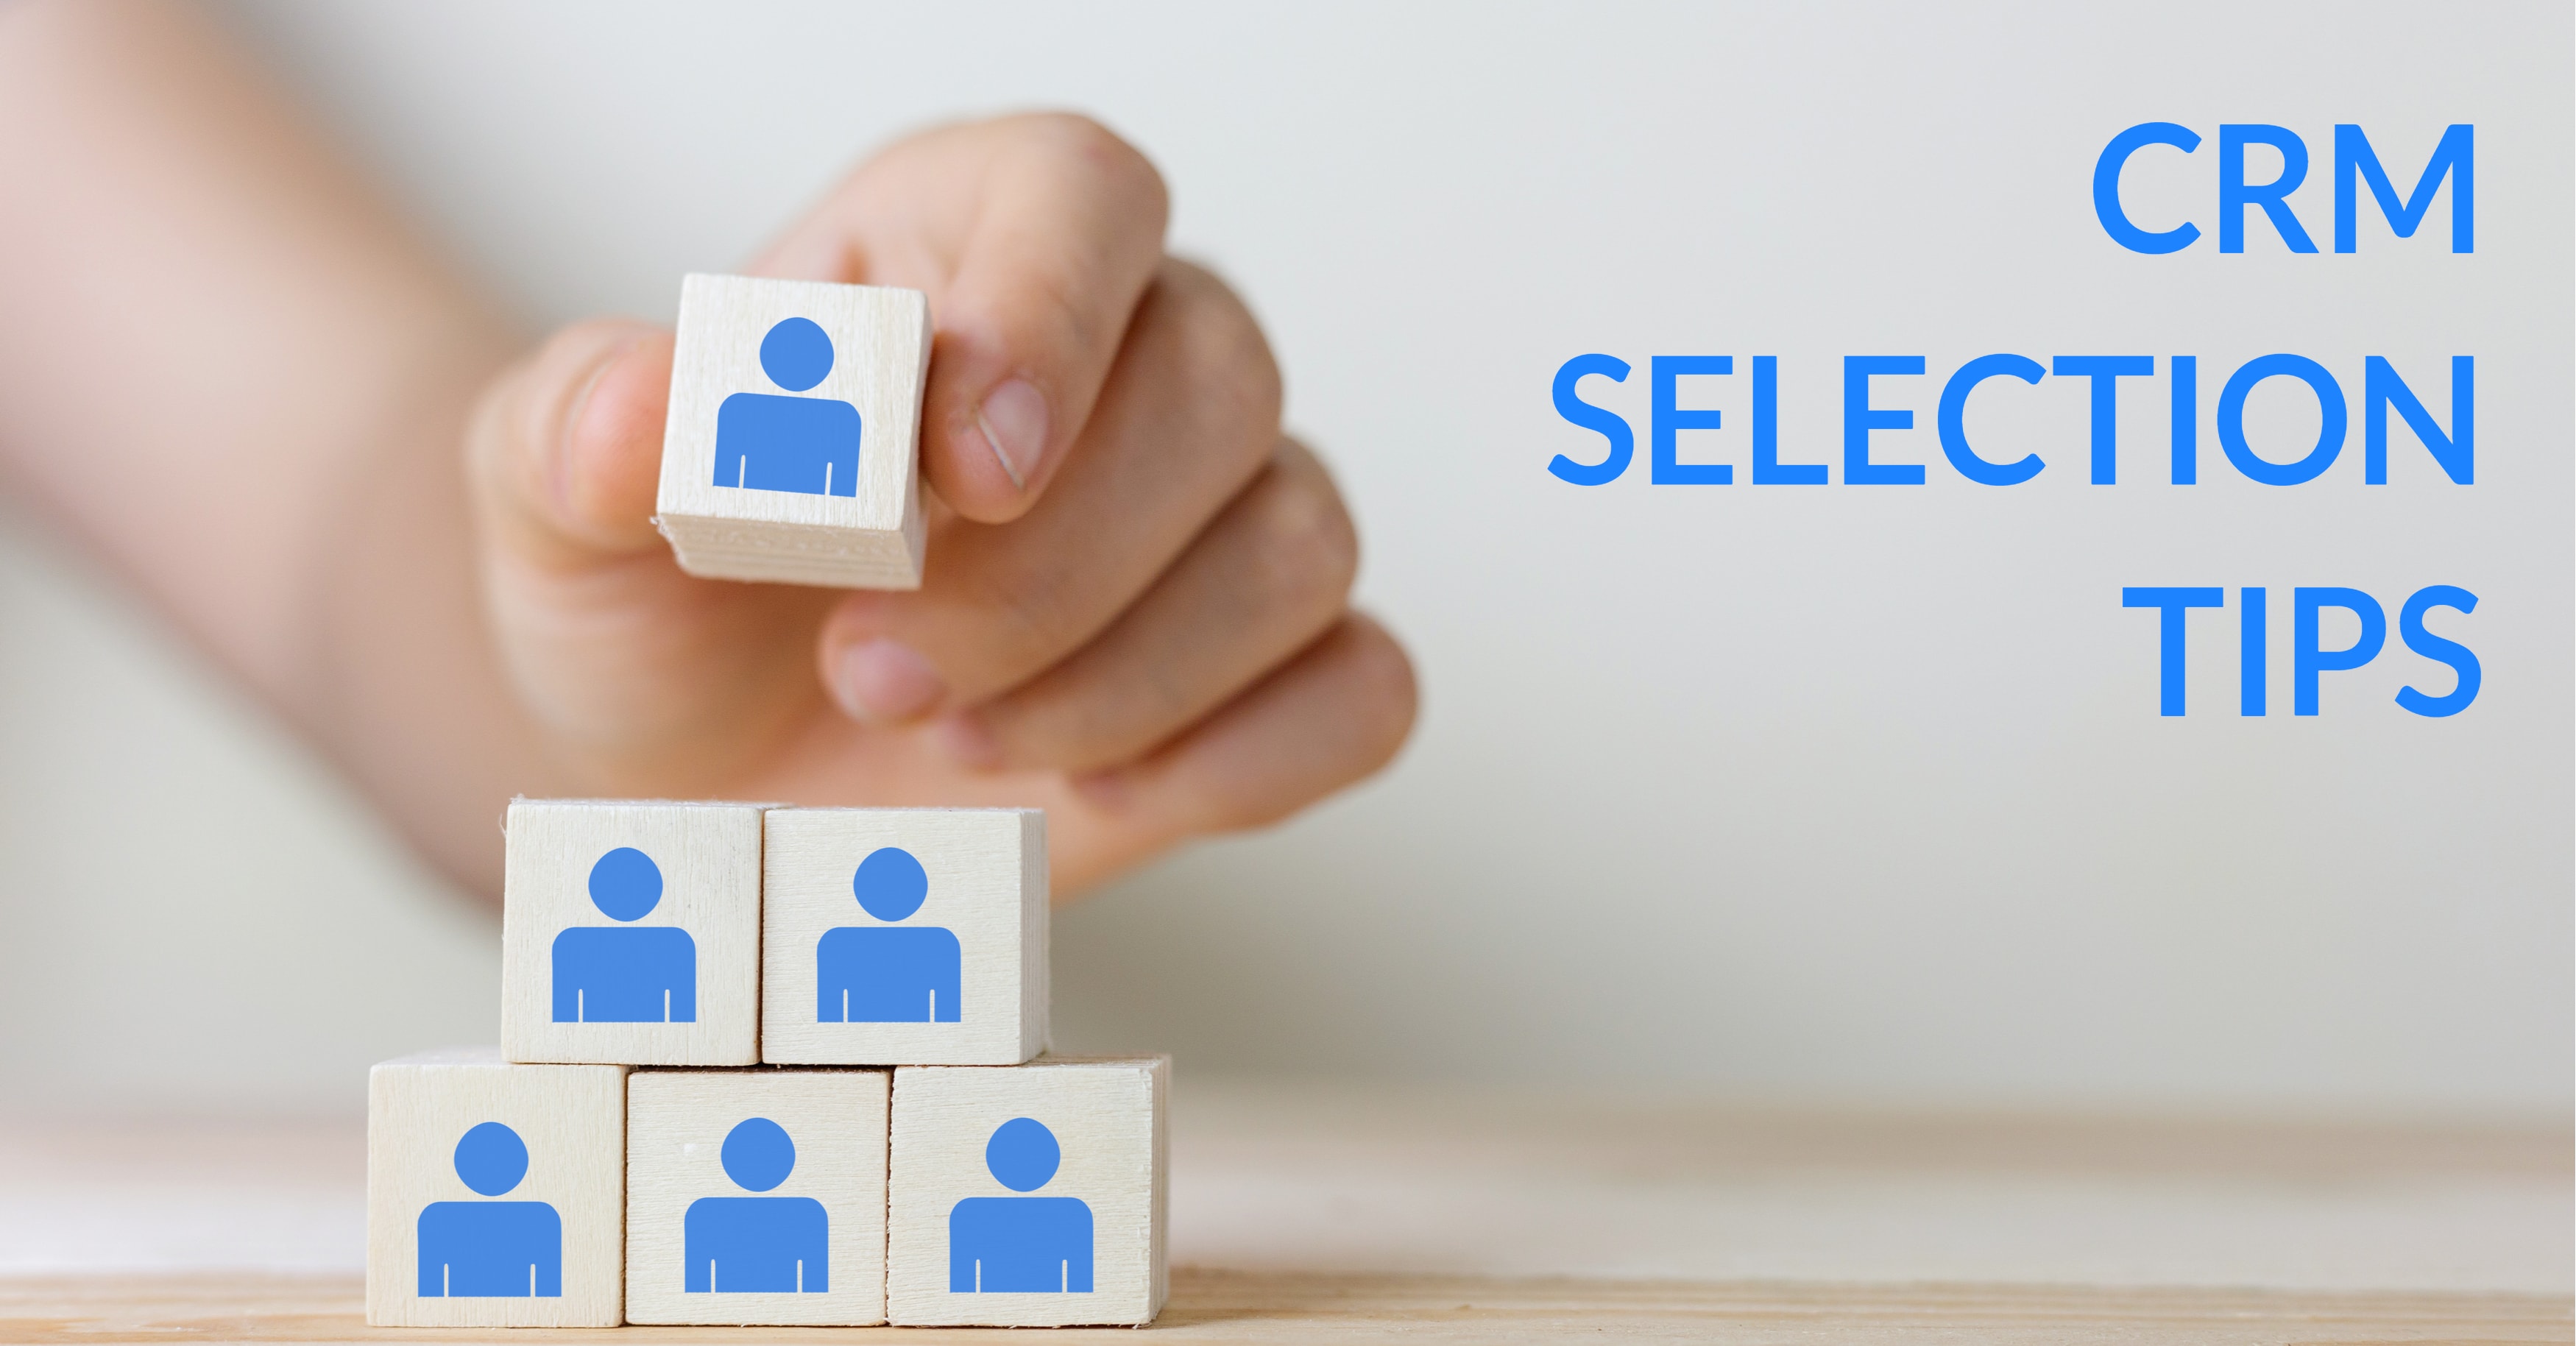 CRM Selection Tips